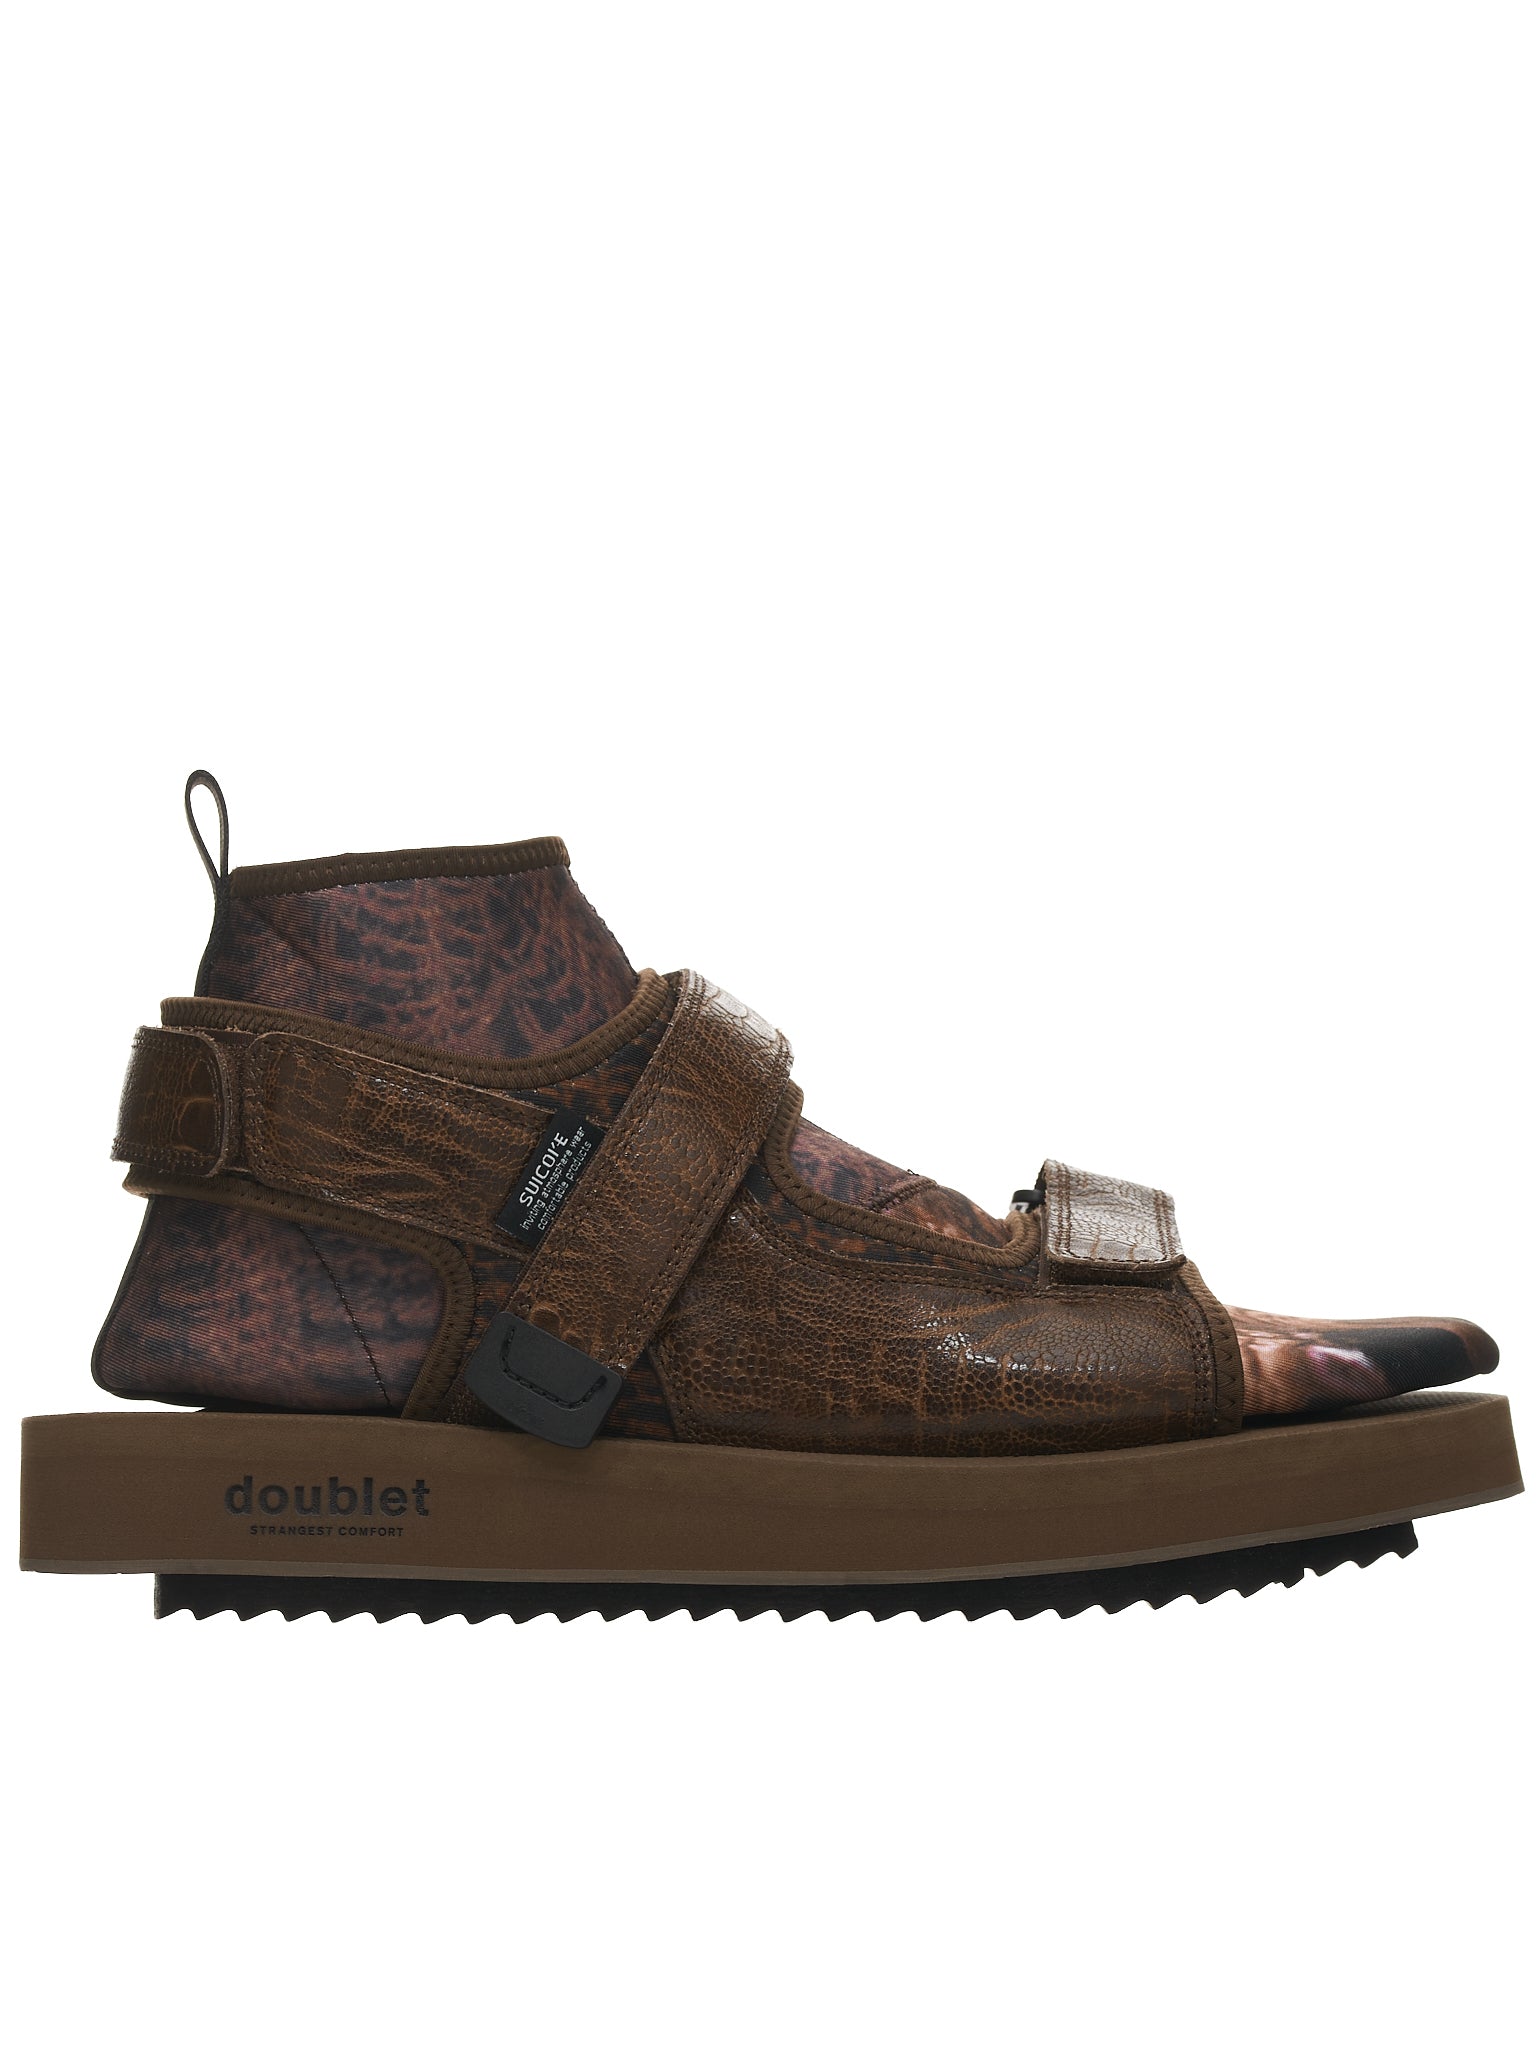 Doublet x Suicoke Animal Foot Layered Sandals | H. Lorenzo - side 